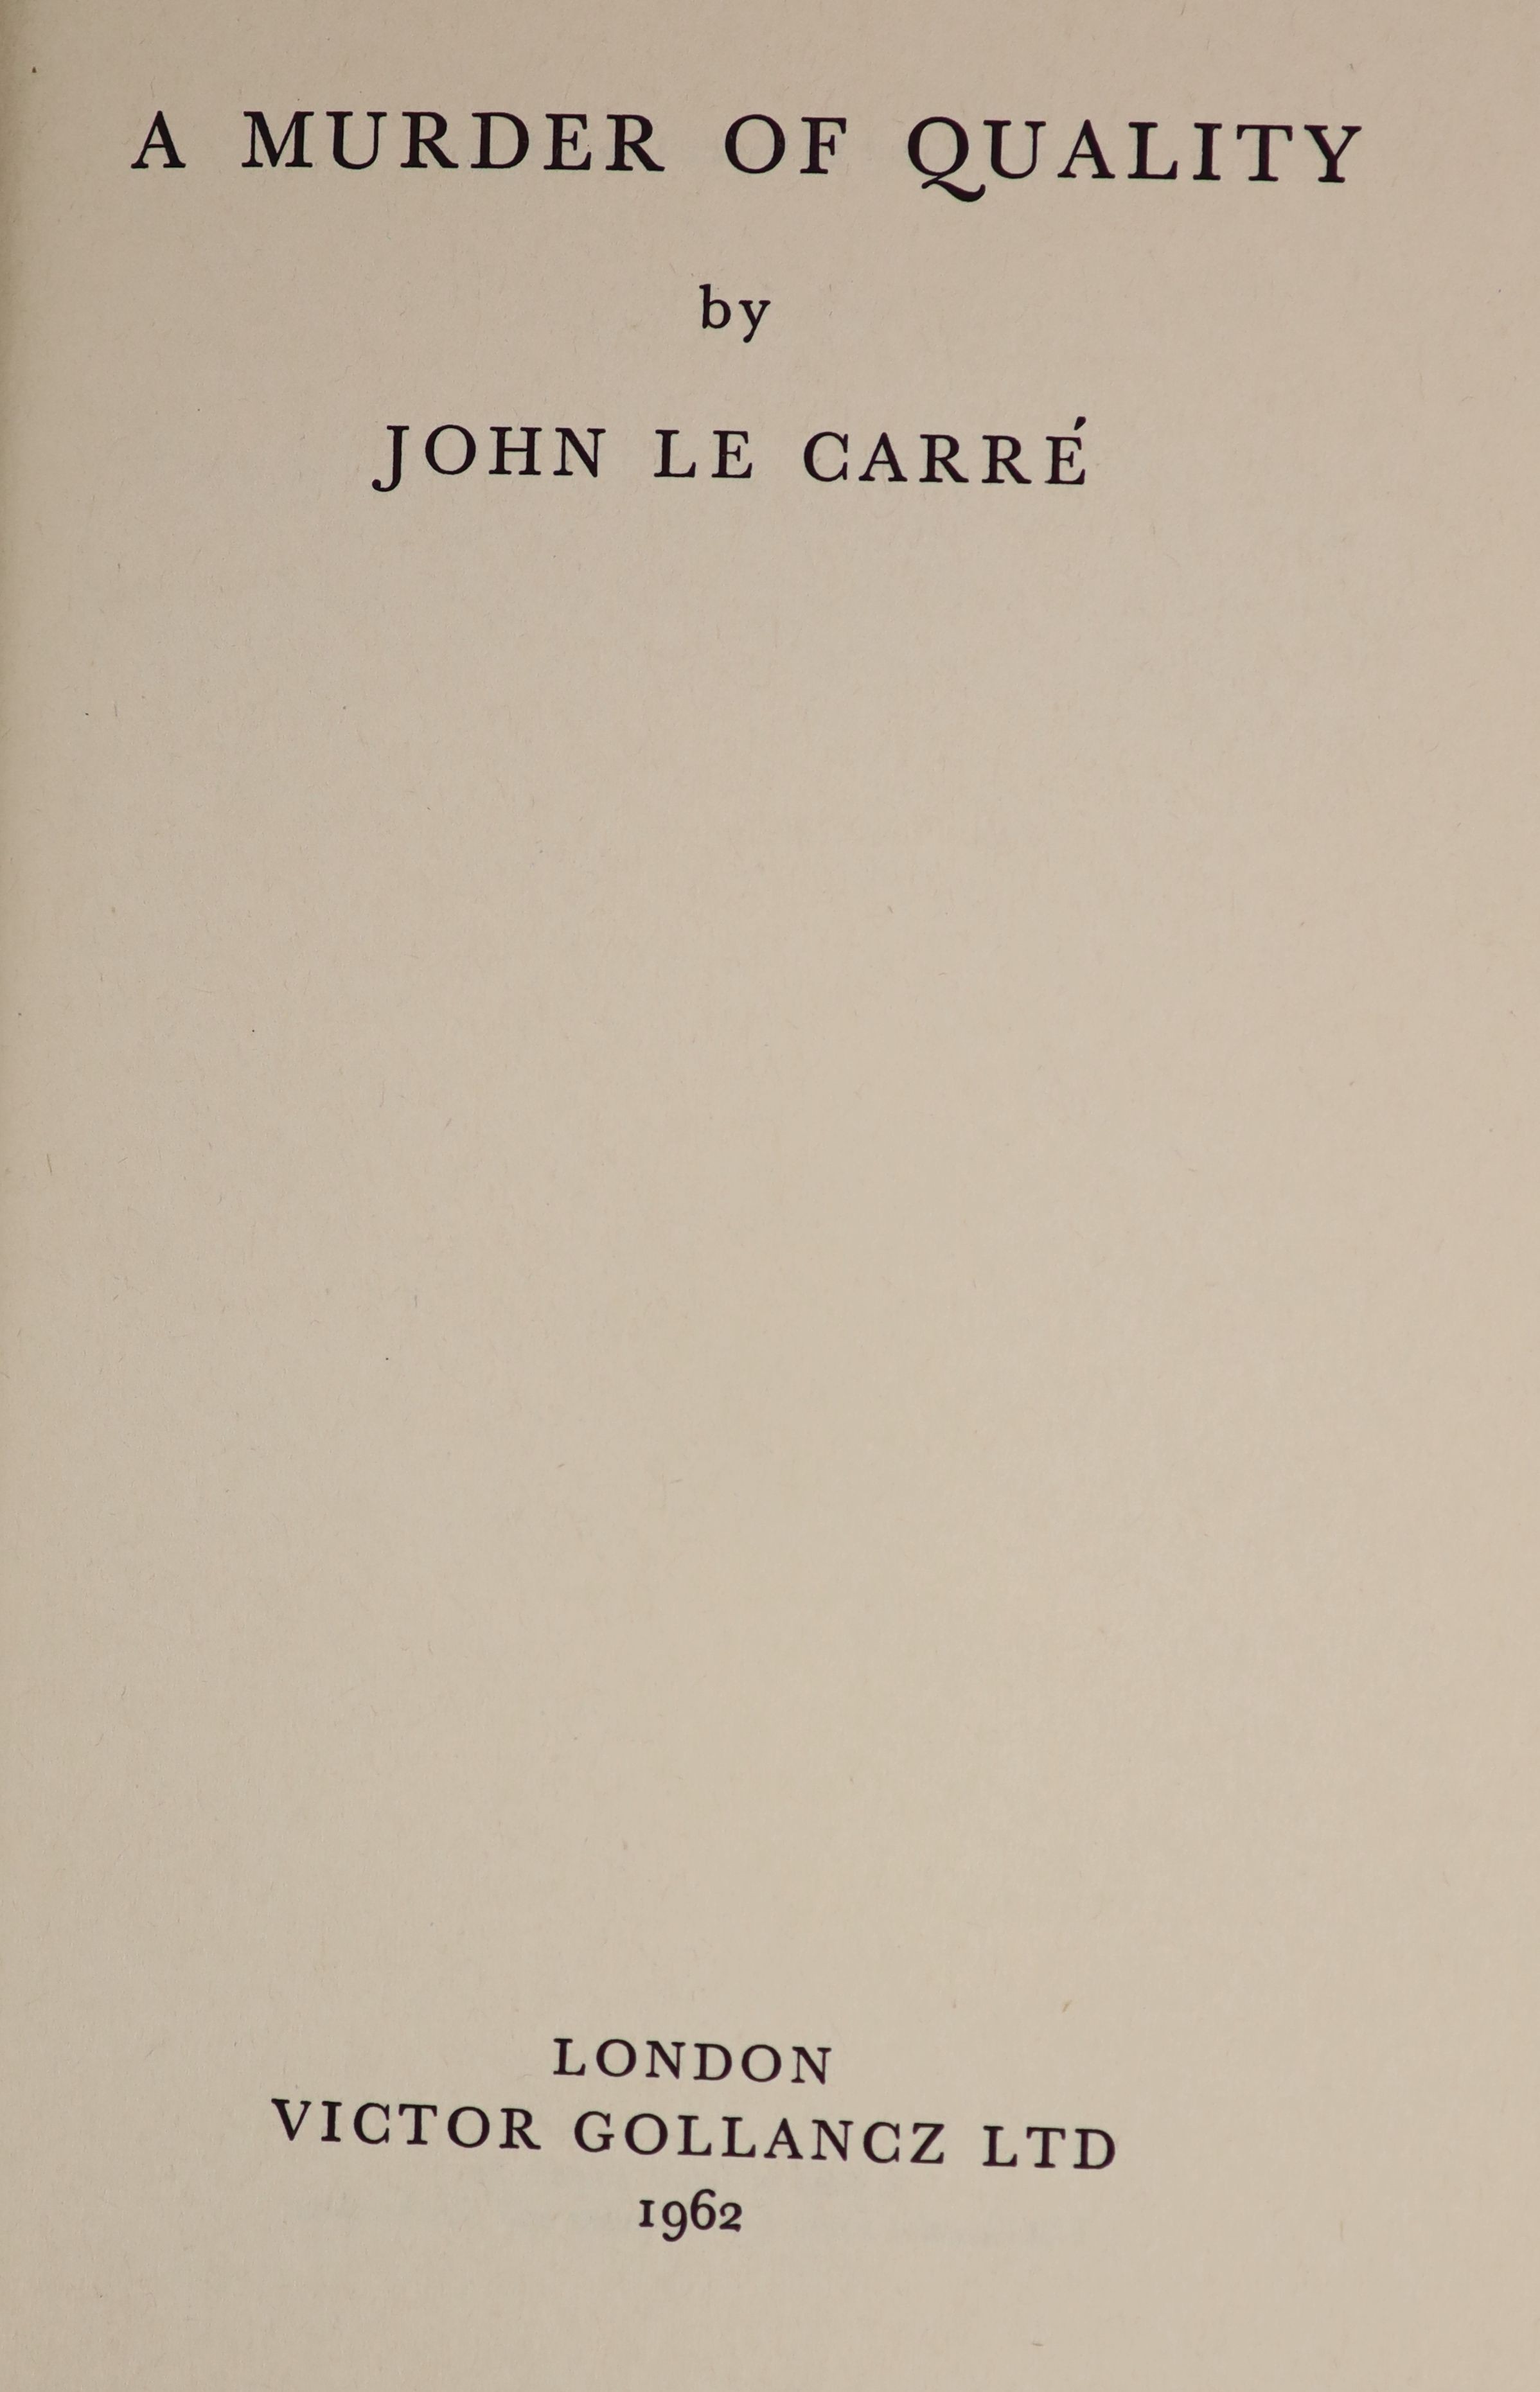 Le Carre, John - A Murder of Quality, 1st edition, 8vo, with d/j, Victor Gollancz, London, 1962